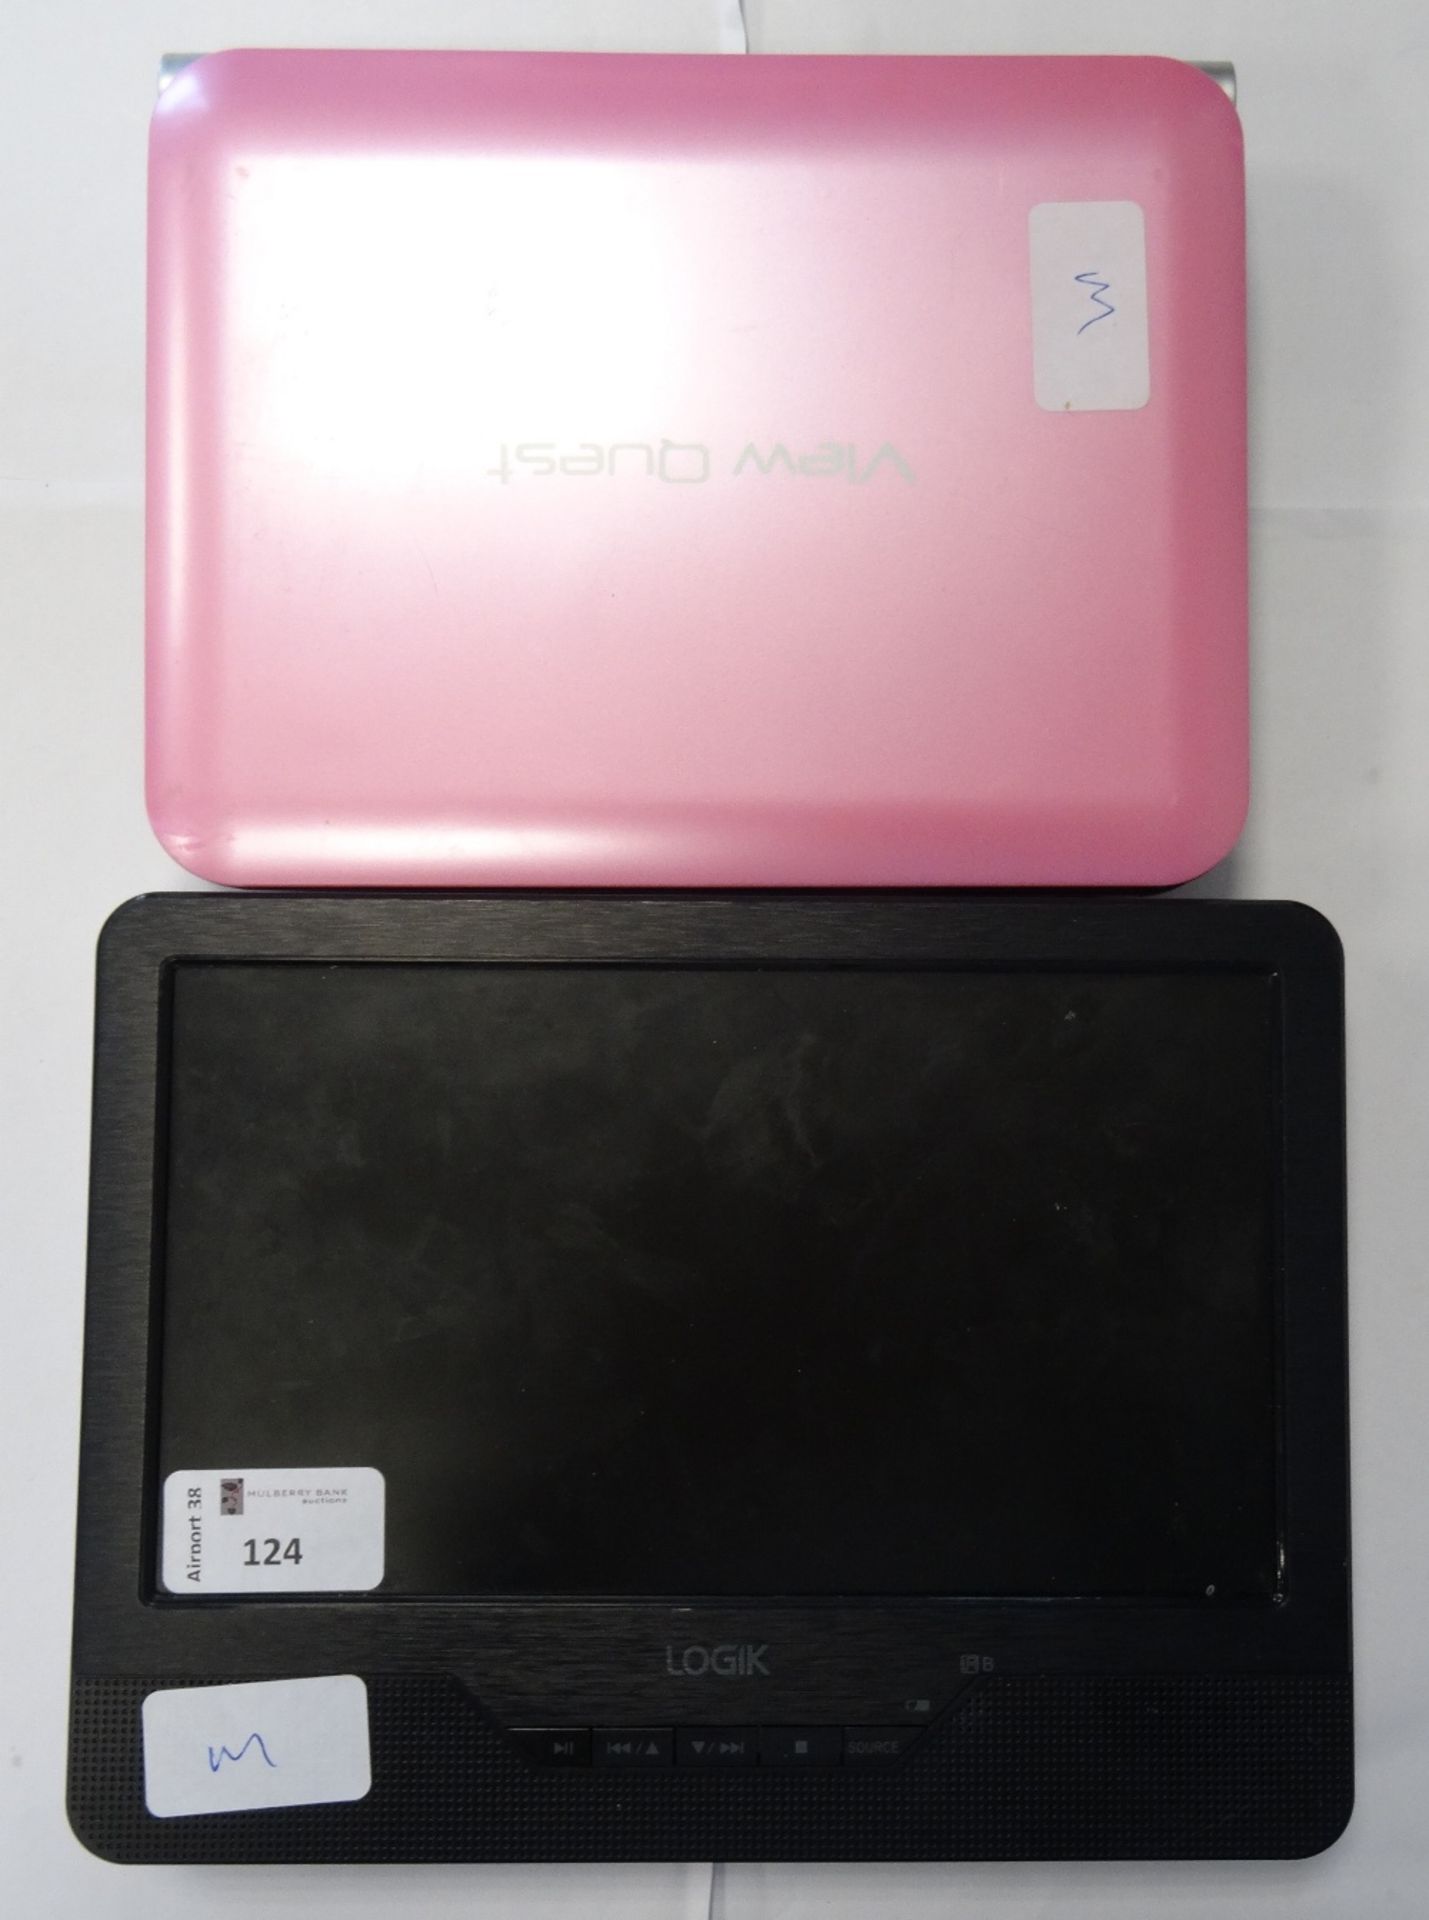 TWO PORTABLE DVD PLAYERS comprising: one VIEW QUEST DVDHP-P; and one LOGIK L9DUALM13.